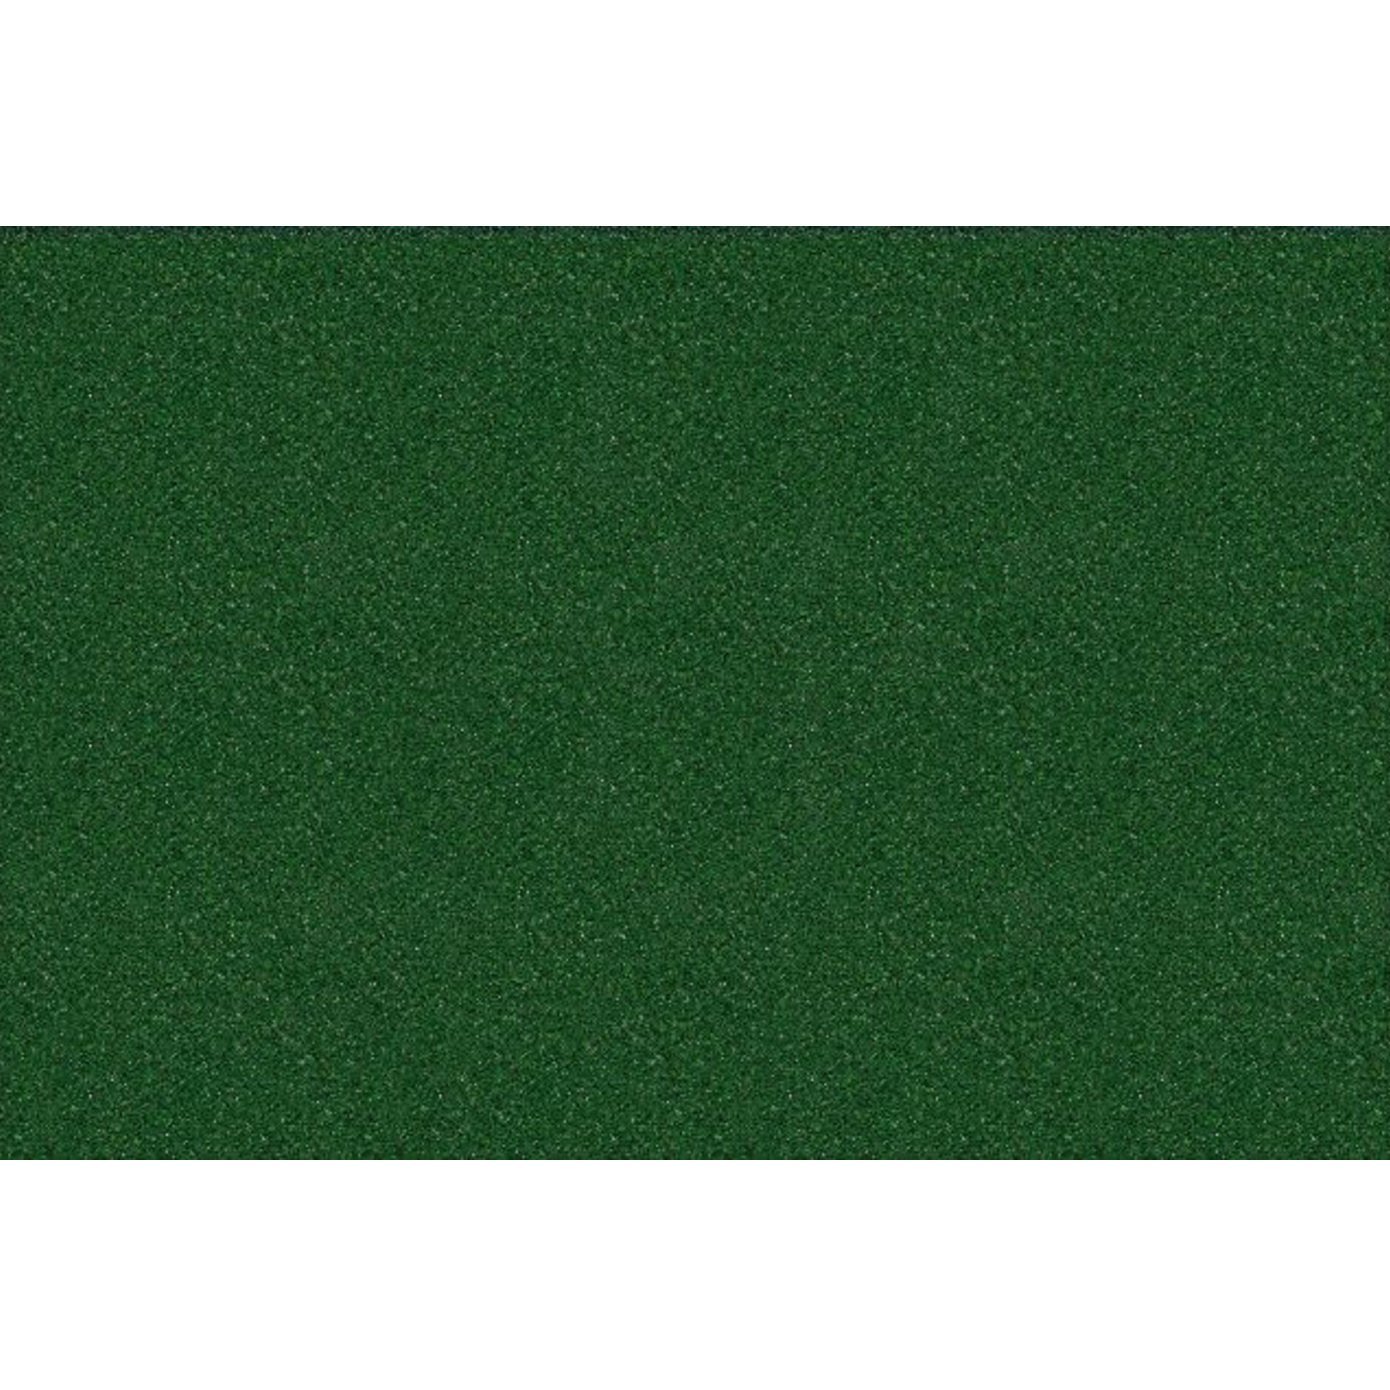 ProTurf Pitcher's Mat - Green - Pitch Pro Direct